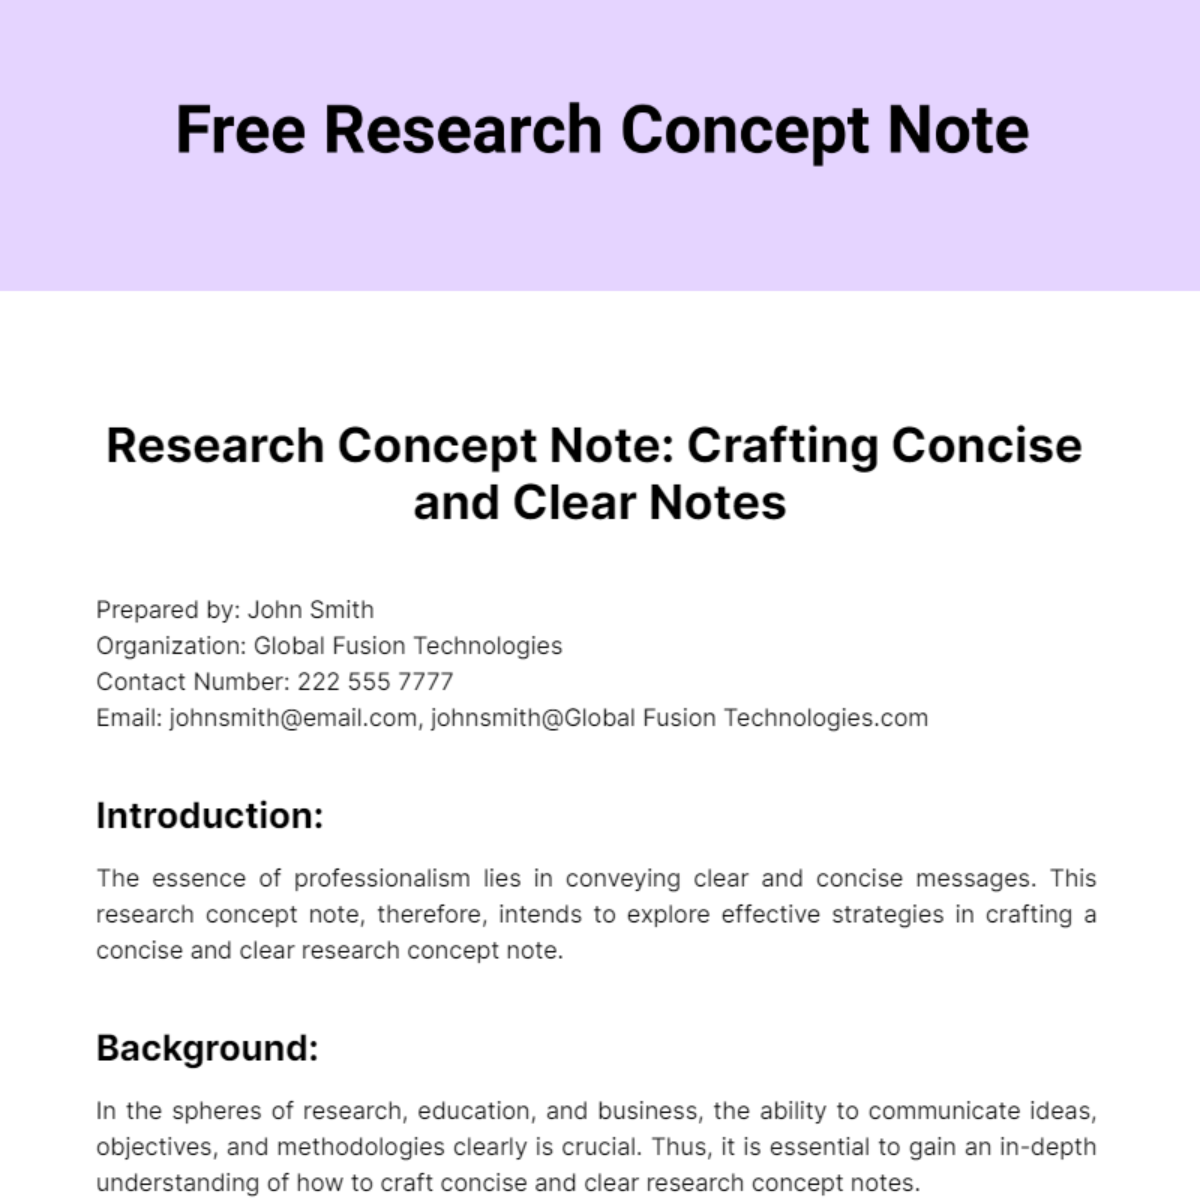 Free Research Concept Note Template